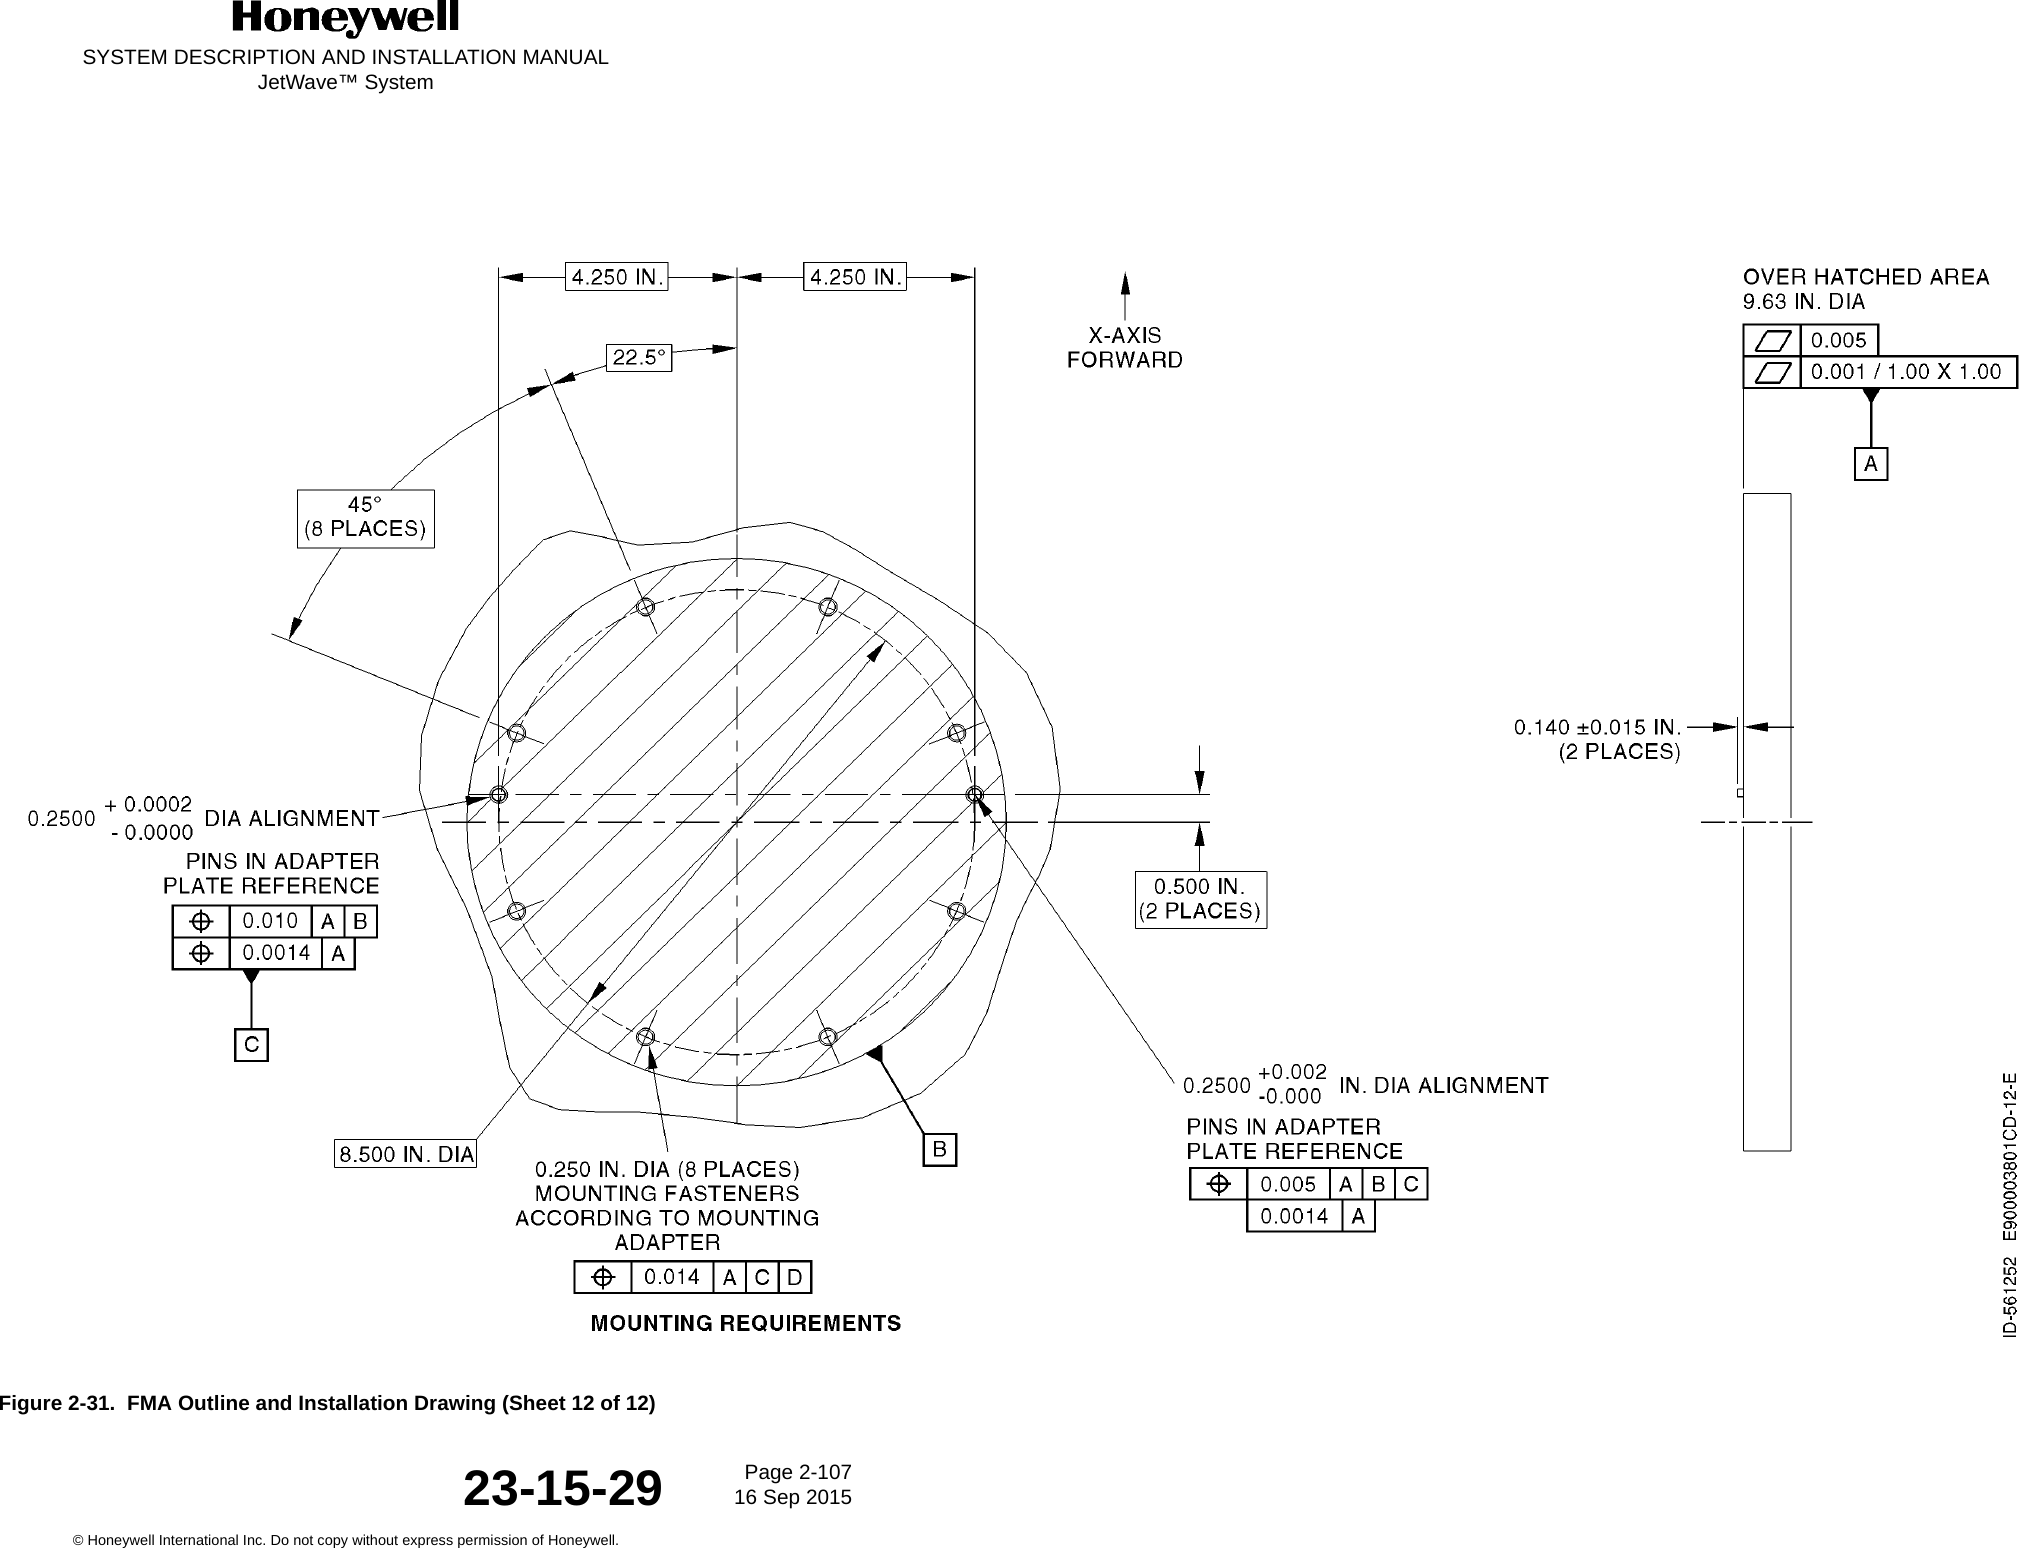 SYSTEM DESCRIPTION AND INSTALLATION MANUALJetWave™ SystemPage 2-107 16 Sep 2015© Honeywell International Inc. Do not copy without express permission of Honeywell.23-15-29Figure 2-31.  FMA Outline and Installation Drawing (Sheet 12 of 12)